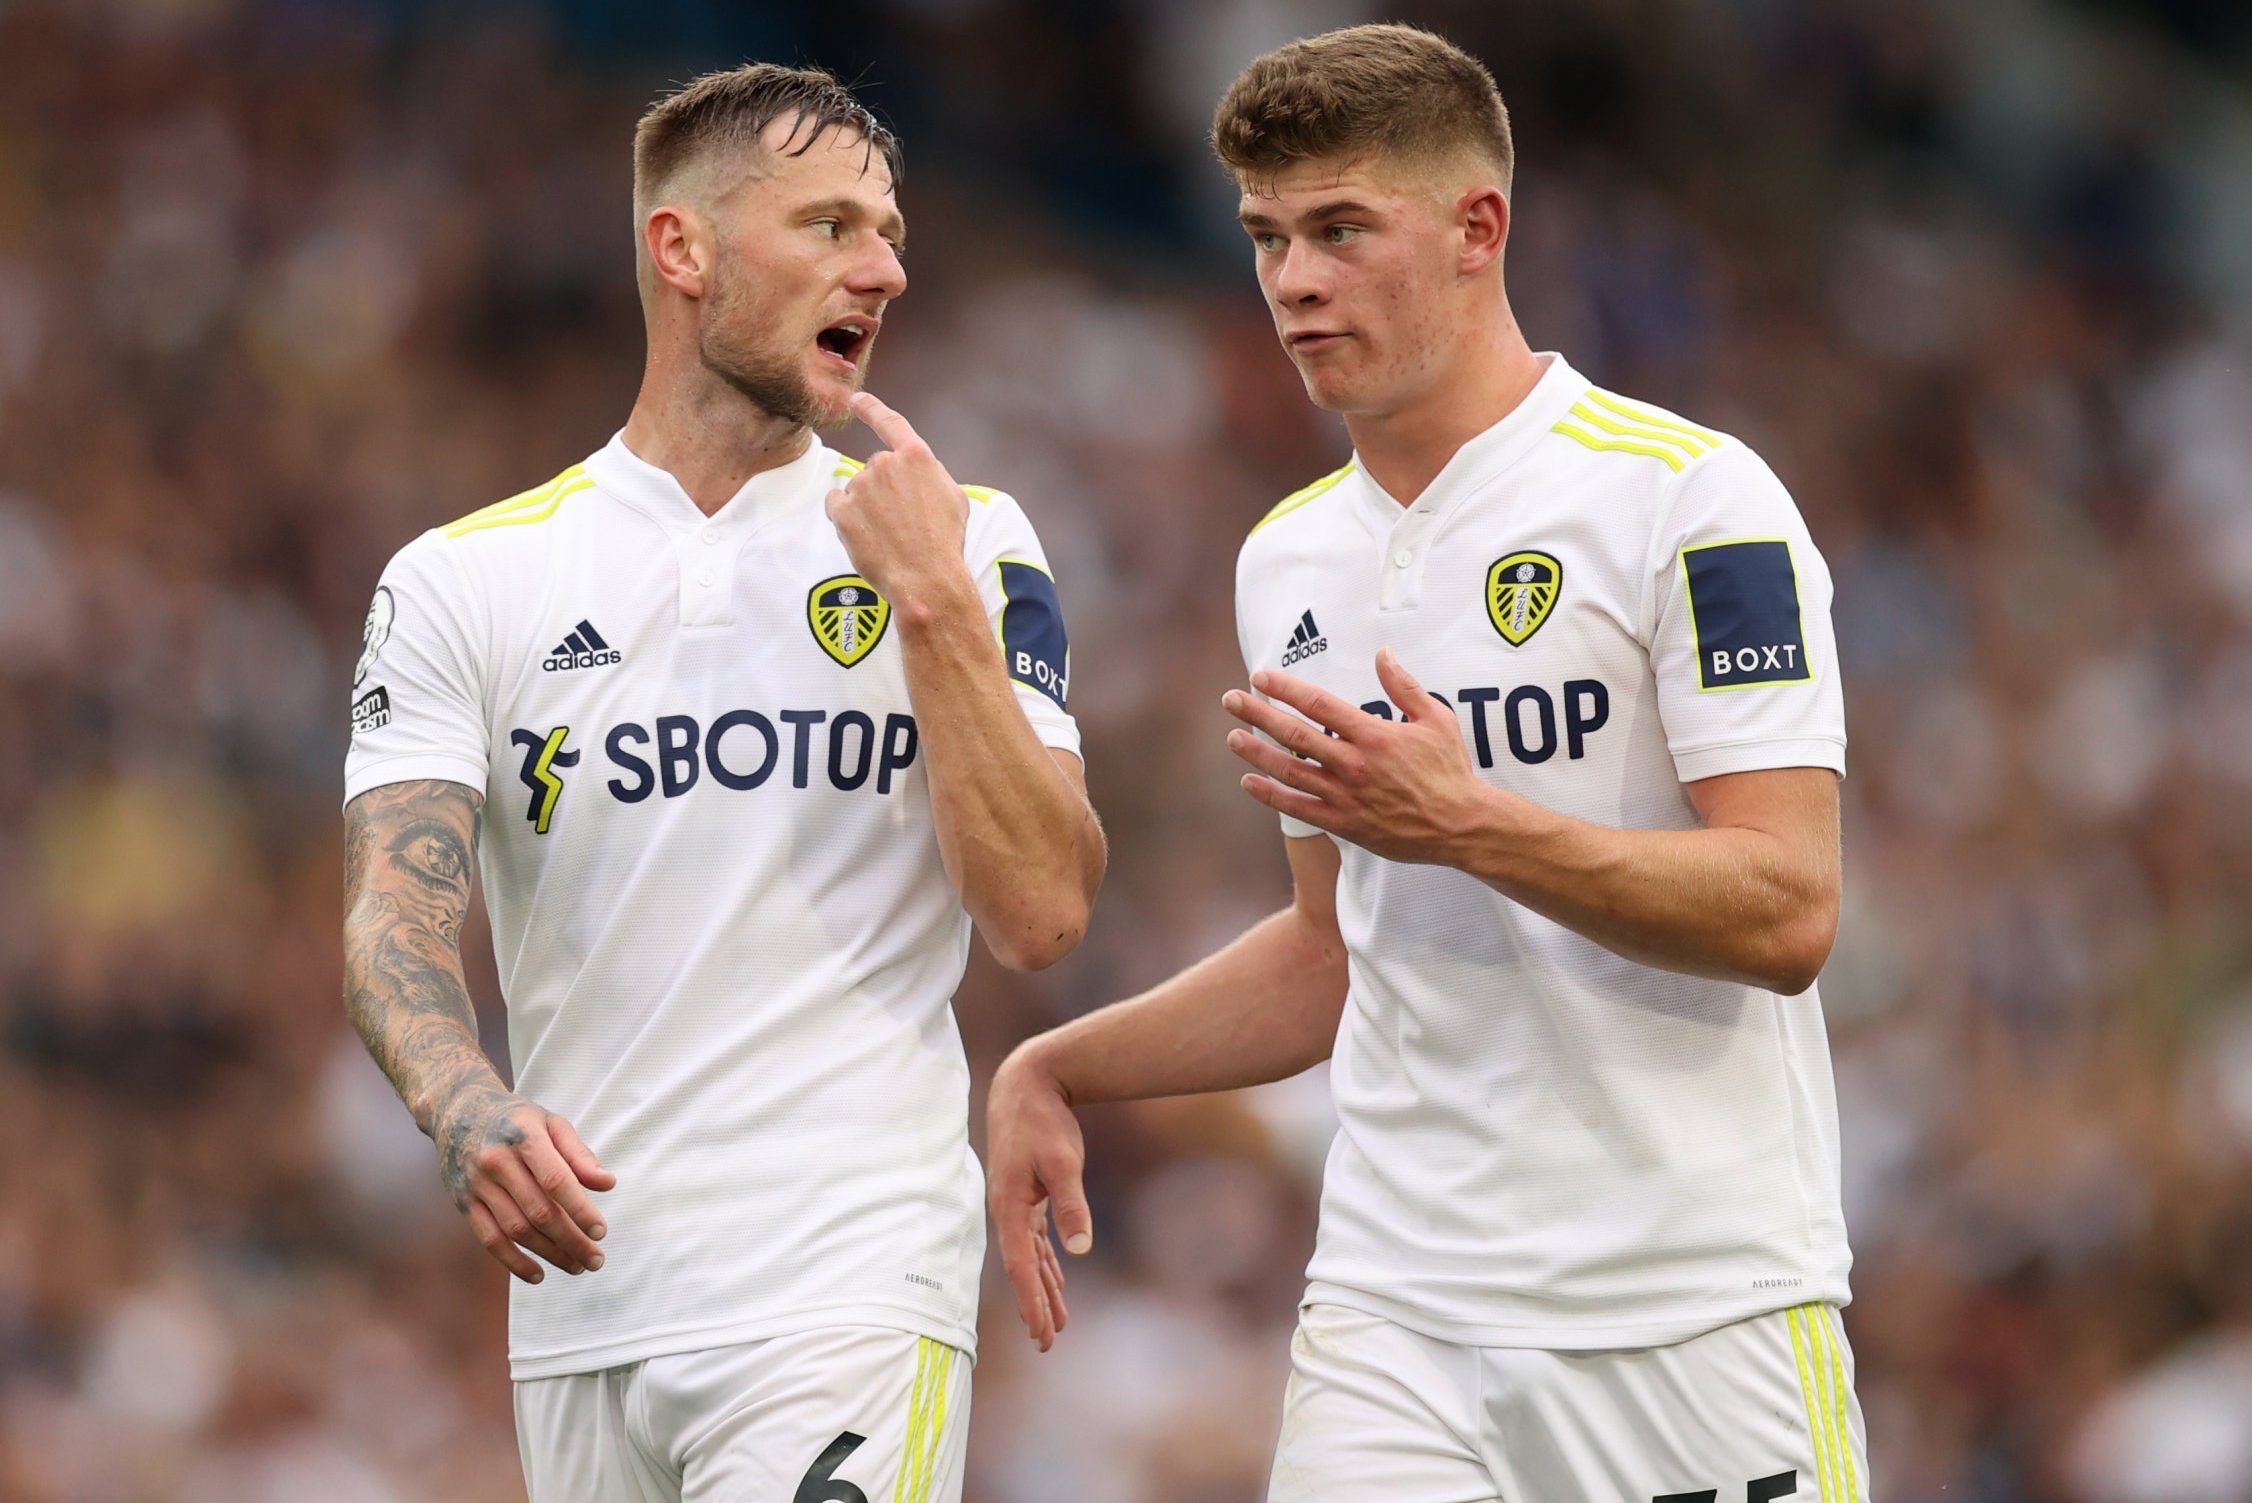 Leeds United youngster Charlie Cresswell alongside captain Liam Cooper against West Ham United in the Premier League